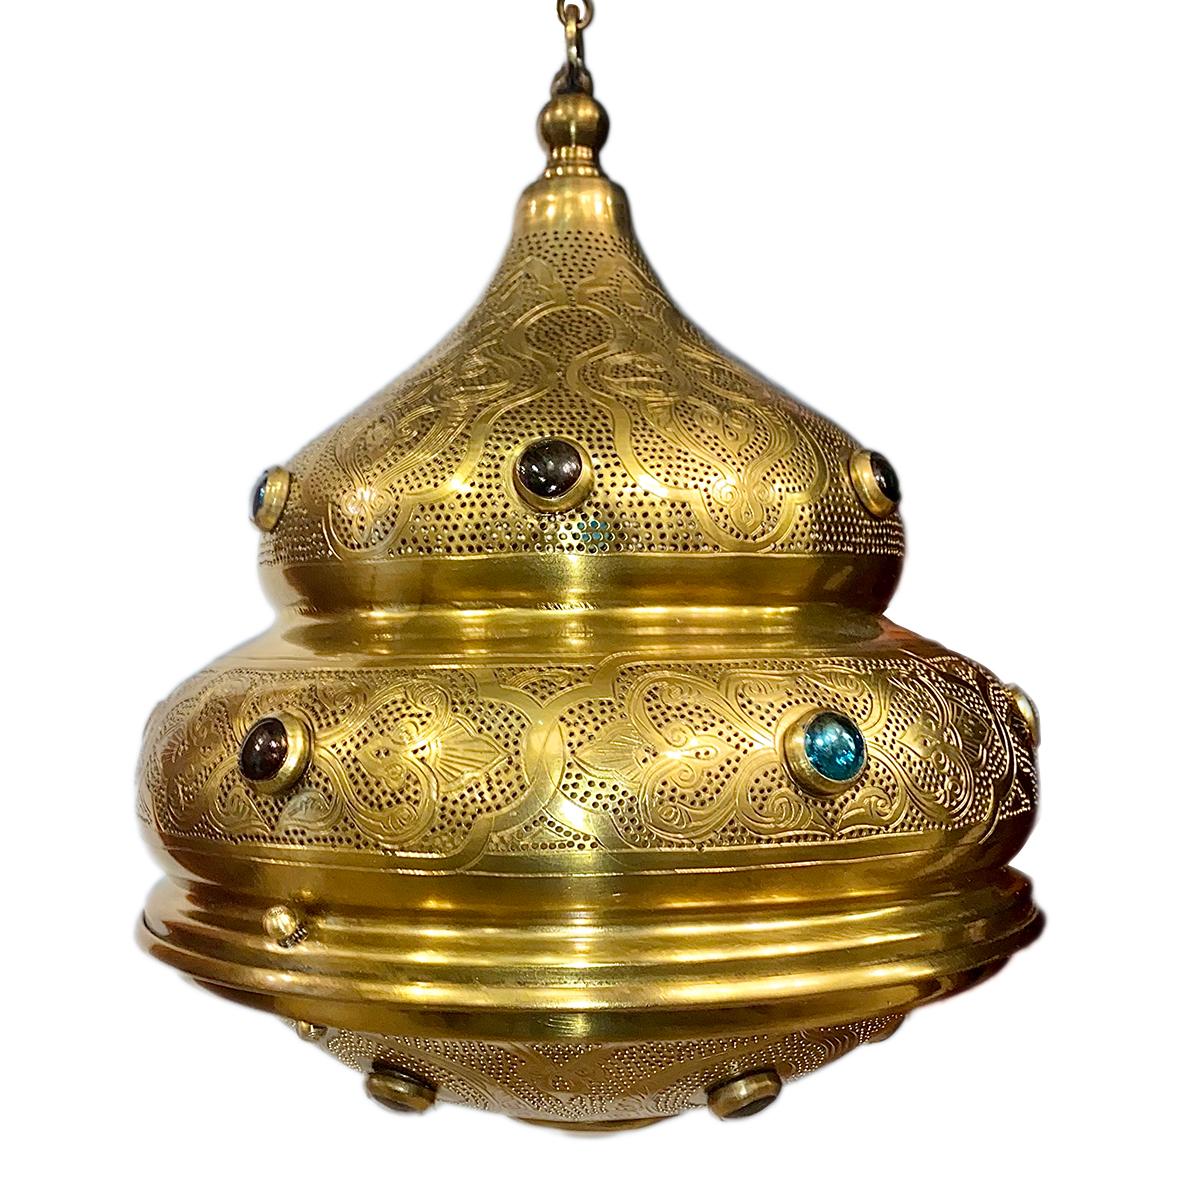 A pair of 1950's pierced brass lantern with glass and stone insets. Single interior light.

Measurements:
Diameter: 12